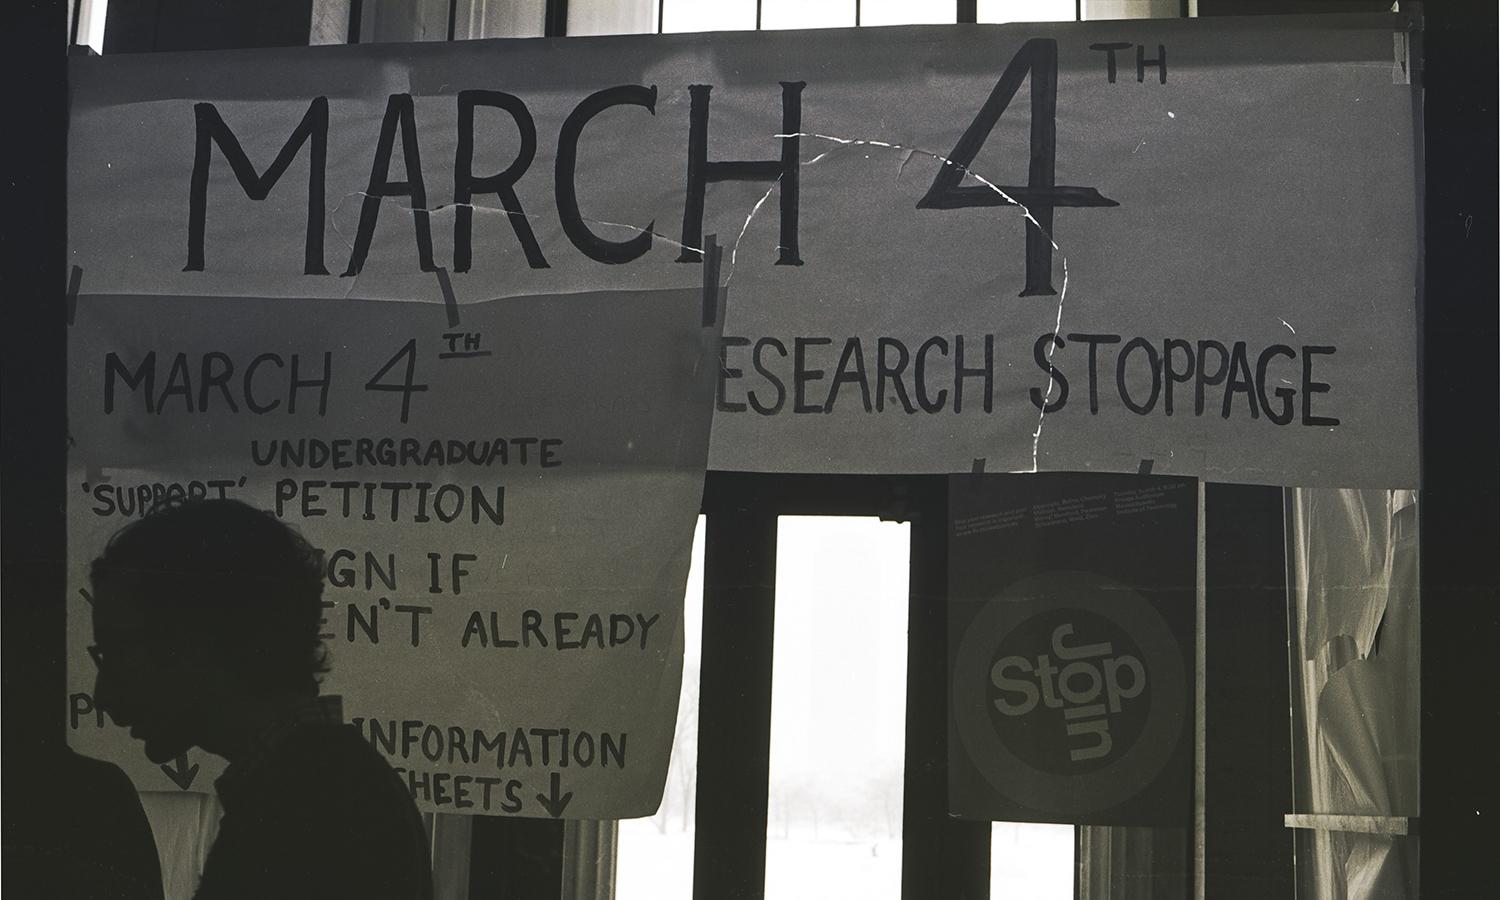 Signs from March 4